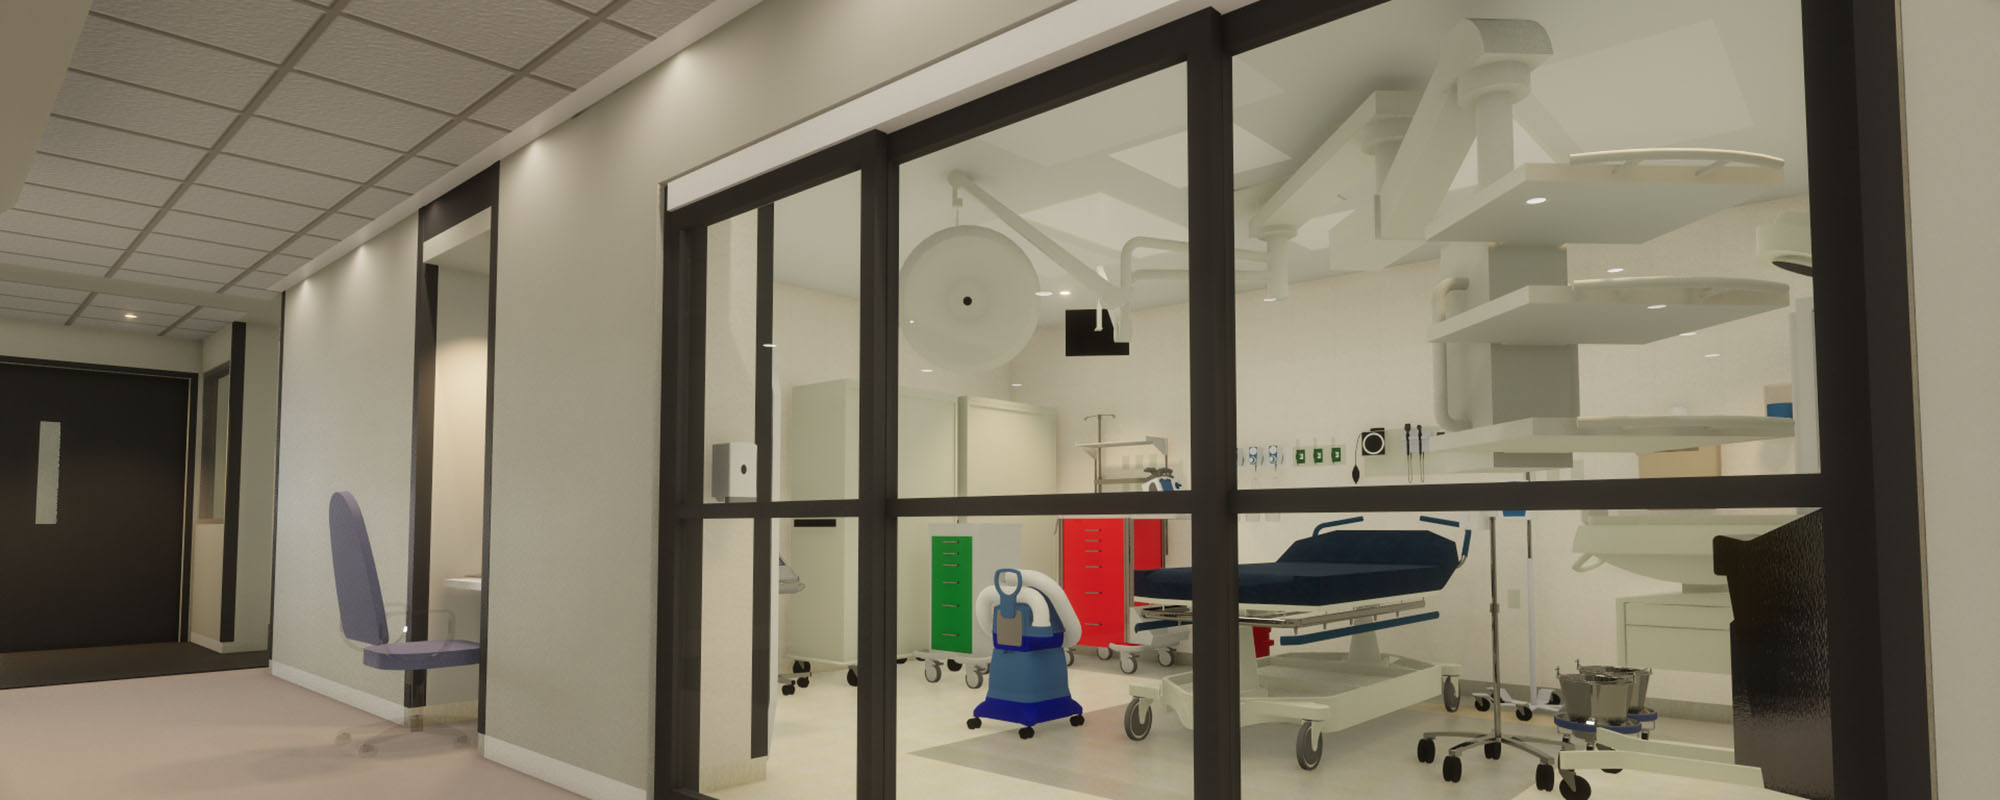 hospital patient room in modeled in virtual reality